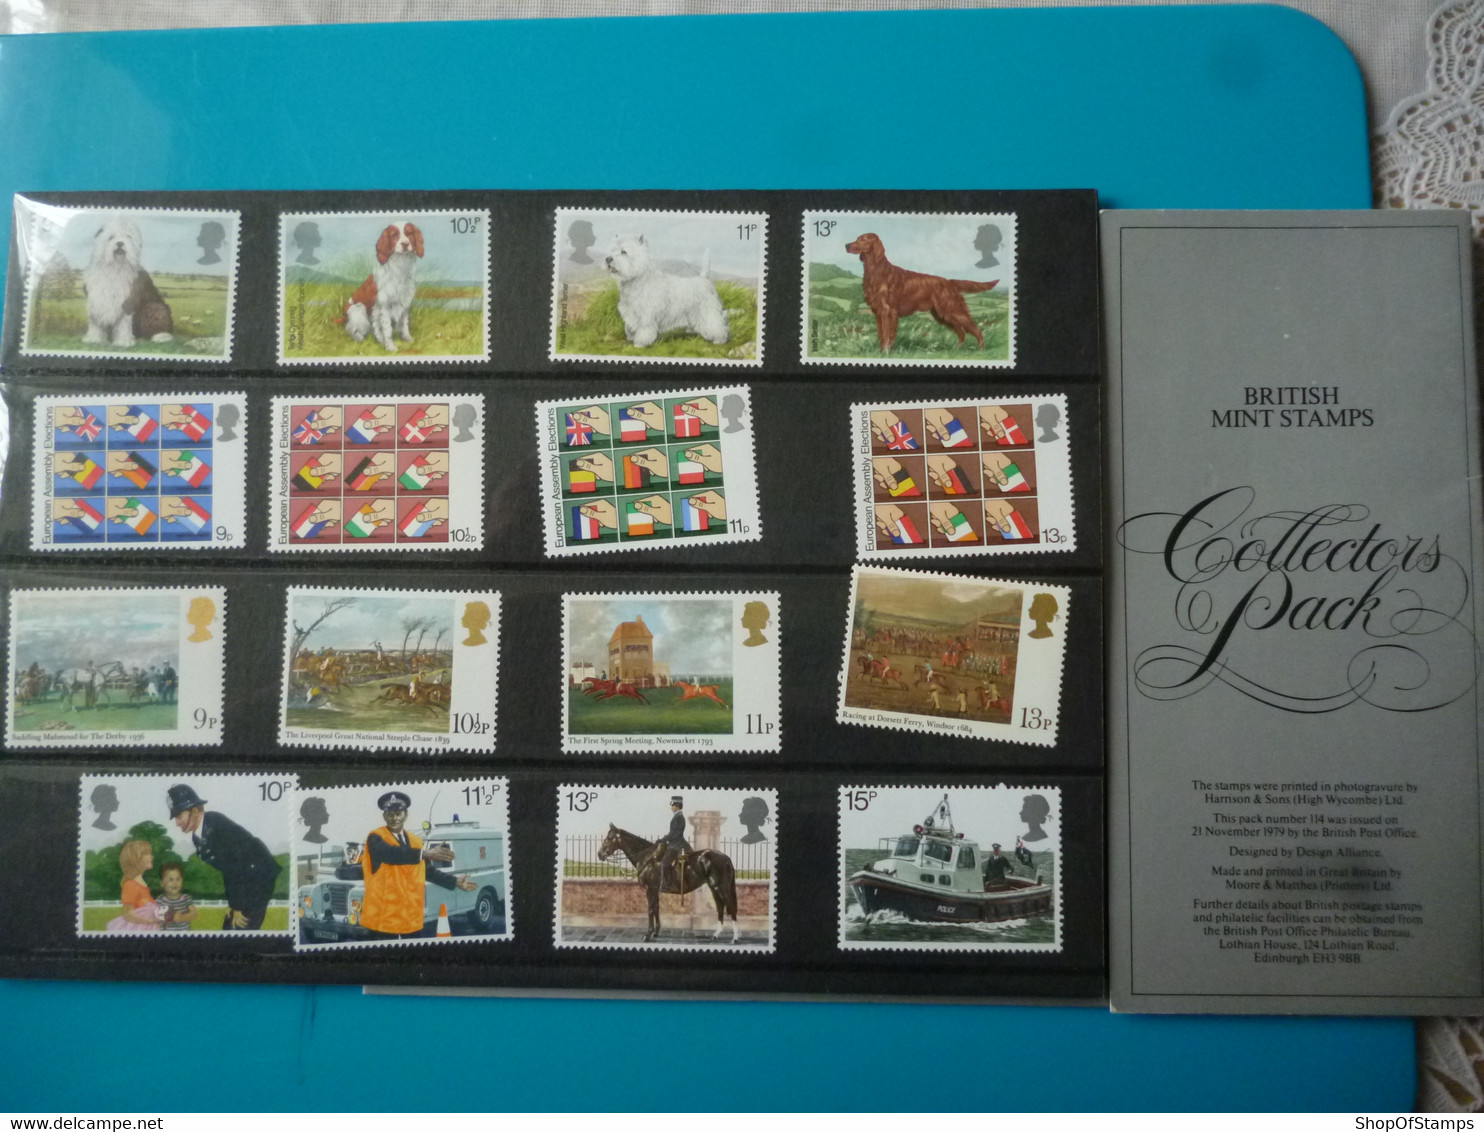 GREAT BRITAIN 1979 COLLECTORS PACK SET MINT - Sheets, Plate Blocks & Multiples